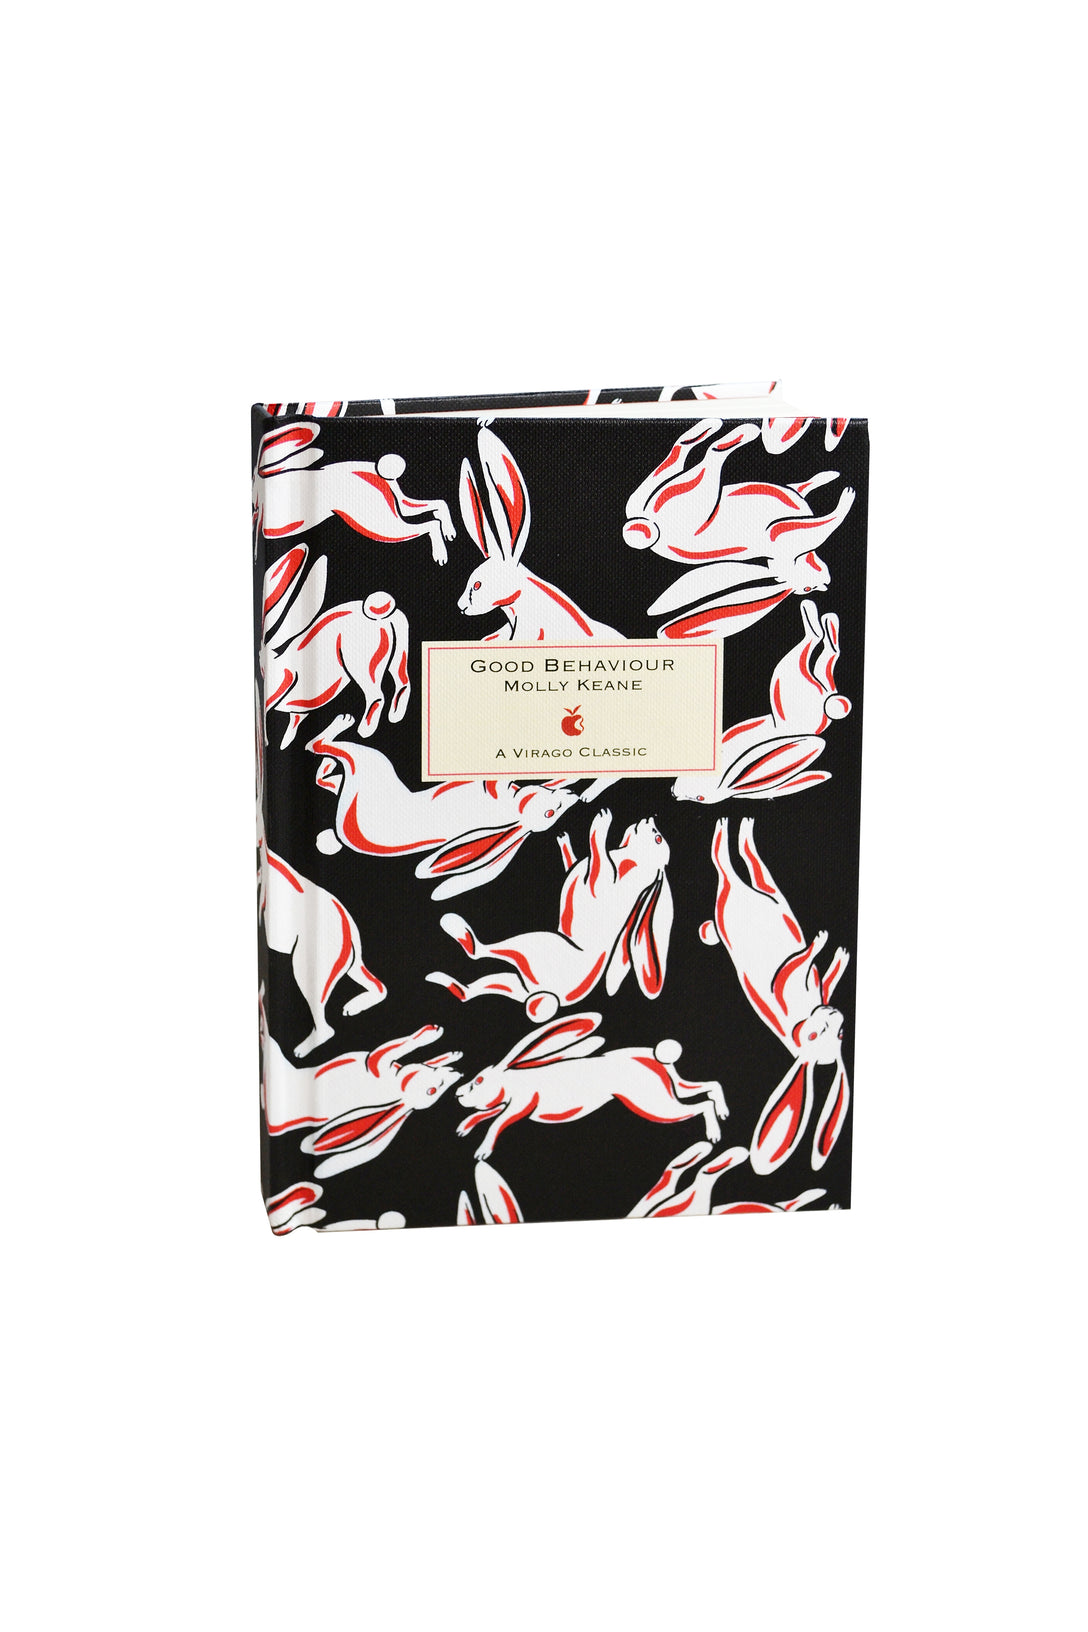 Good Behaviour unlined notebook by Molly Keane